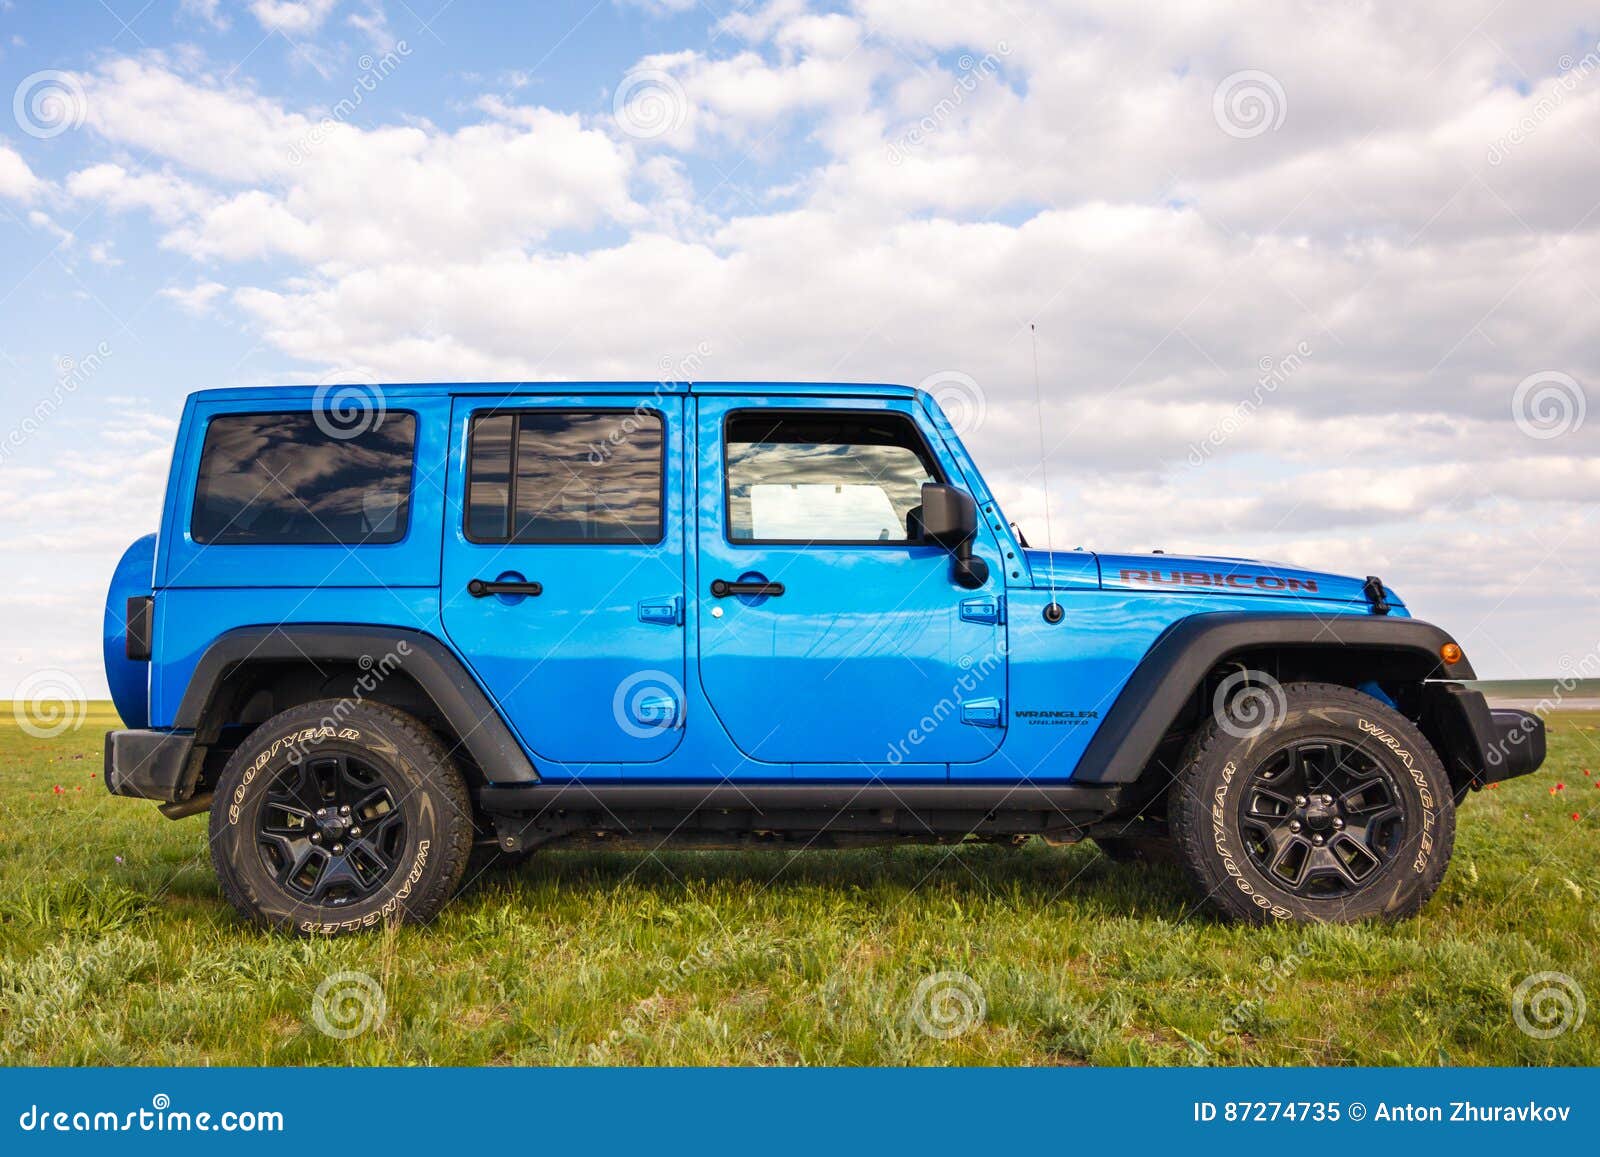 Blue Jeep Wrangler Rubicon Unlimited in Wild Tulip Field Near Saltwater  Reservoir Lake Manych-Gudilo Editorial Image - Image of metal, beautiful:  87274735